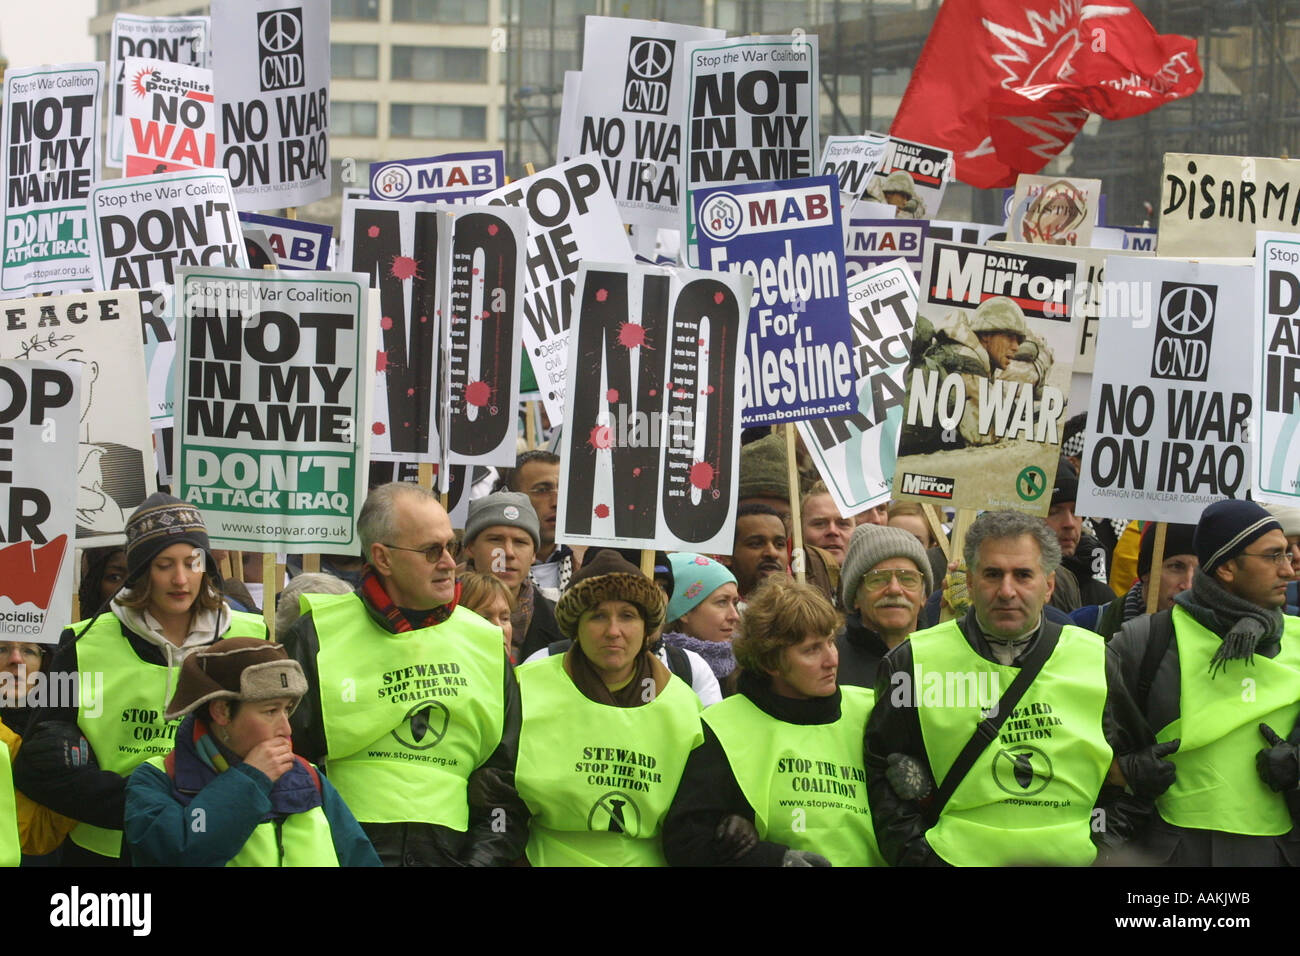 PROTESTORS LEAD THE STOP THE IRAQ WAR DEMONSTRATION IN LONDON FEBRUARY 13 2003 Stock Photo